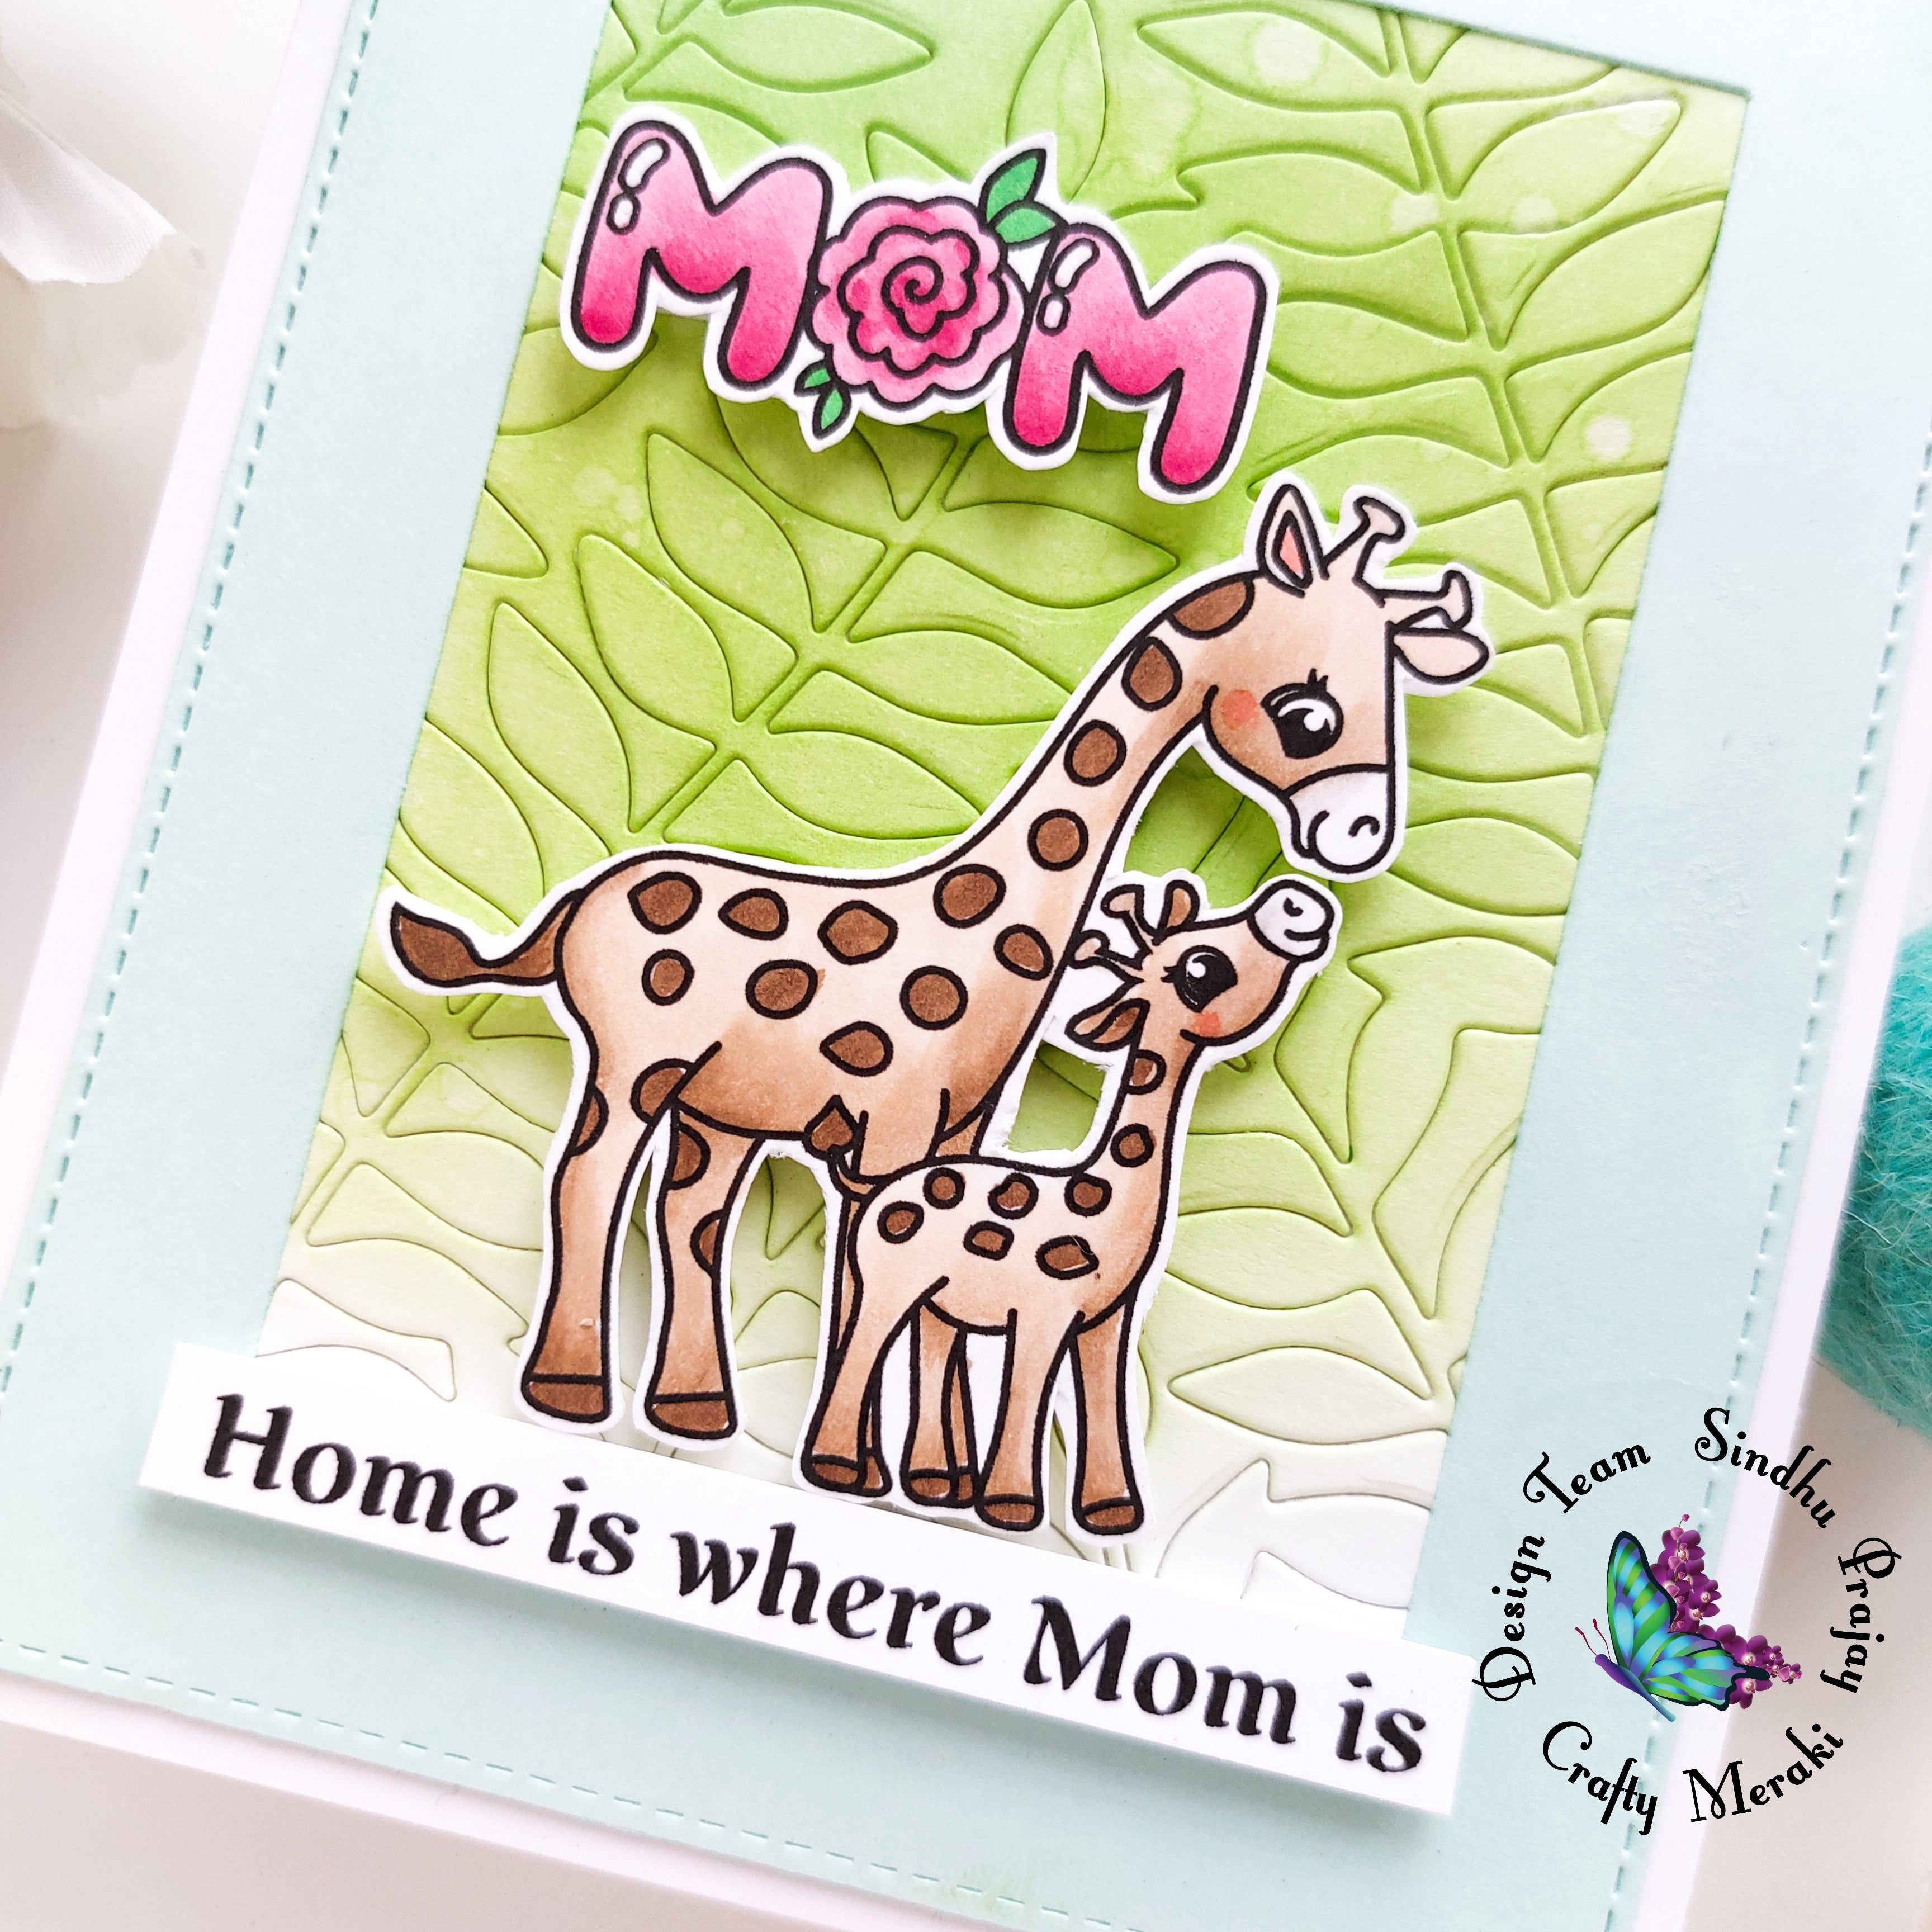 Home is where mom is by Sindhu